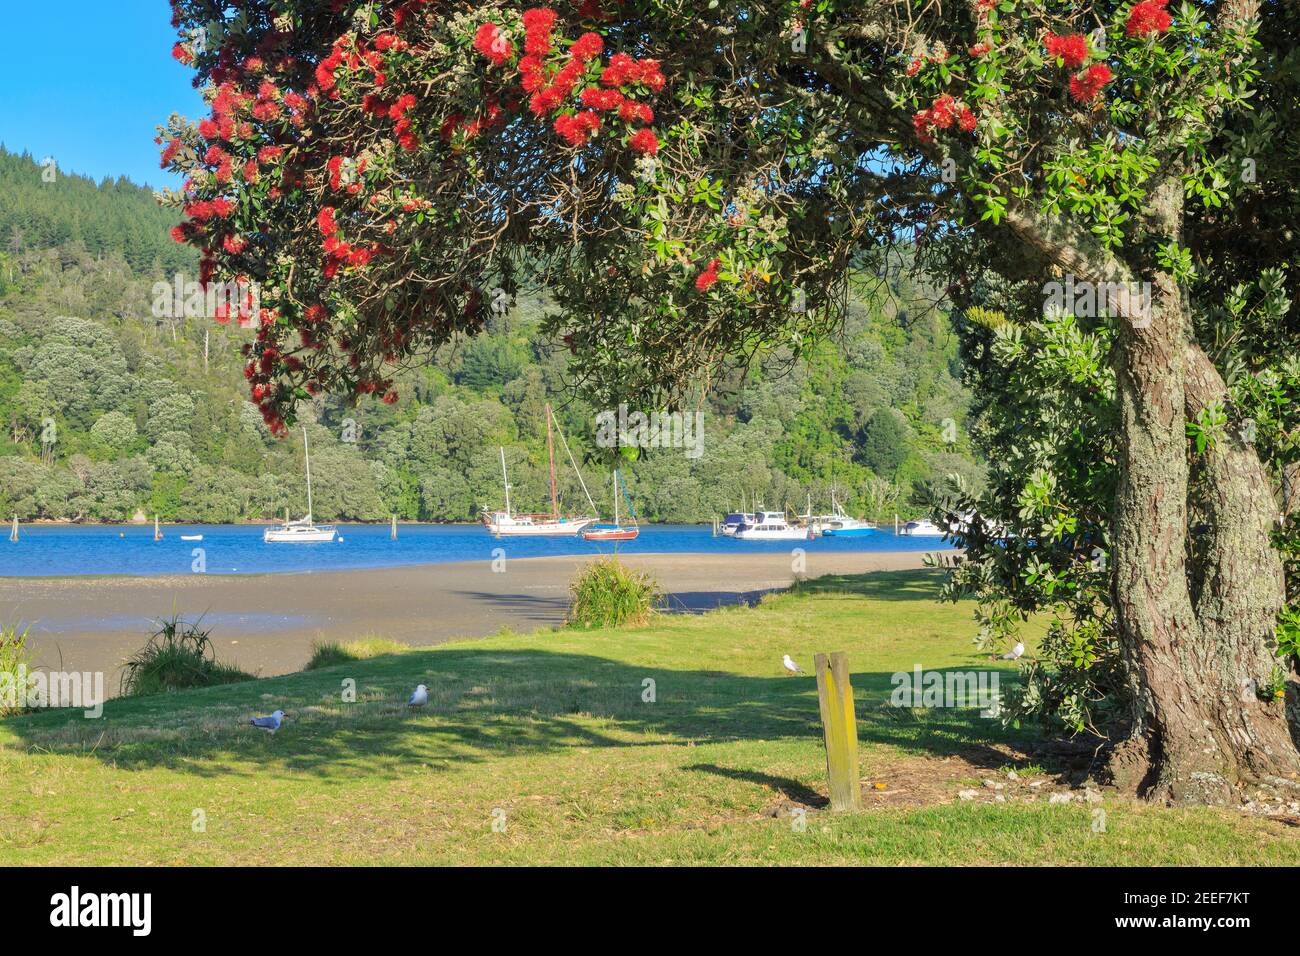 Boats in Whangamata Harbour, New Zealand, with a flowering pohutukawa tree in the foreground Stock Photo